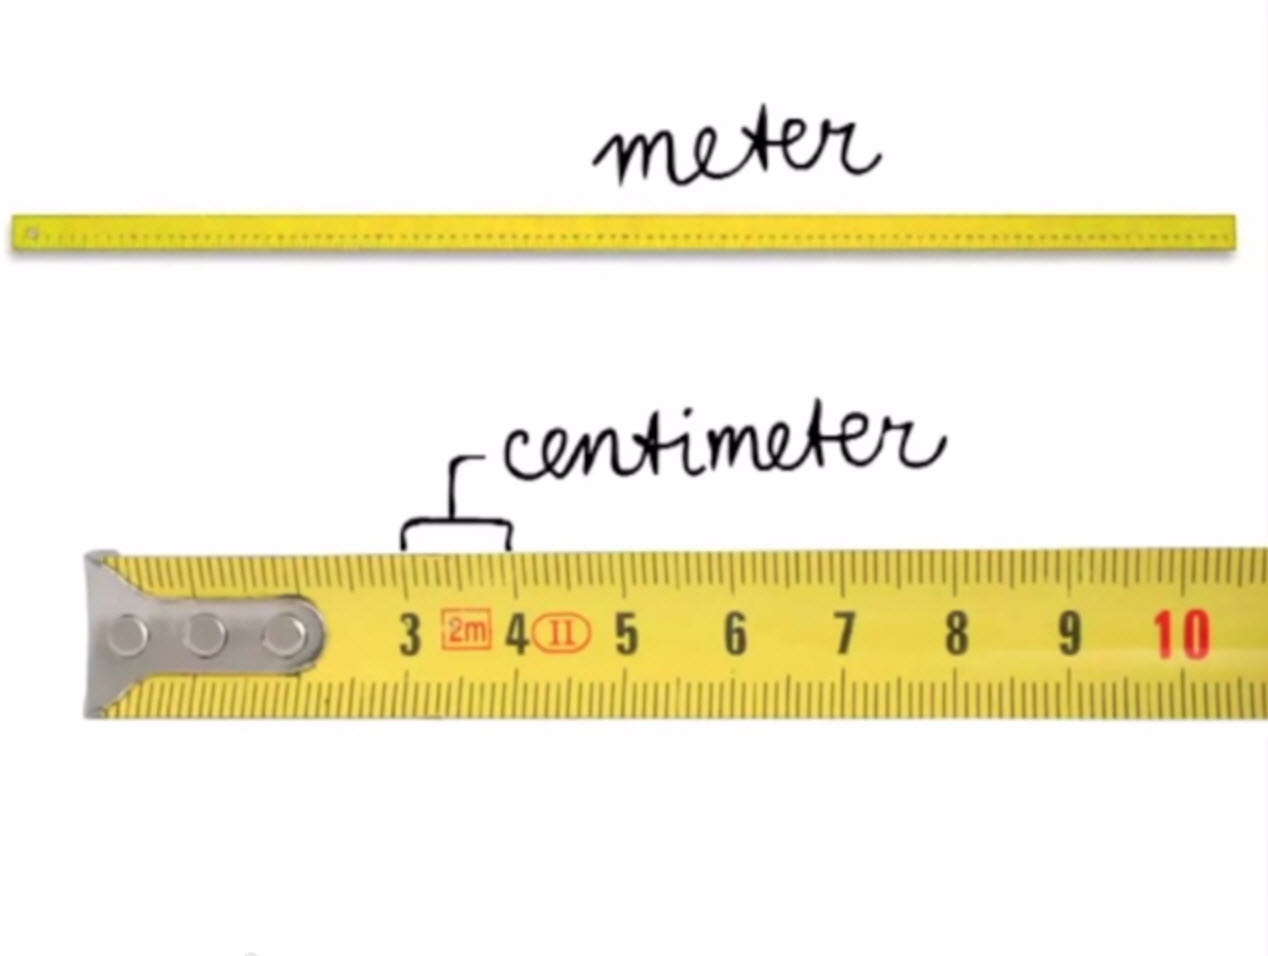 Microsoft Paint-- how to change the ruler to inches and centimeters